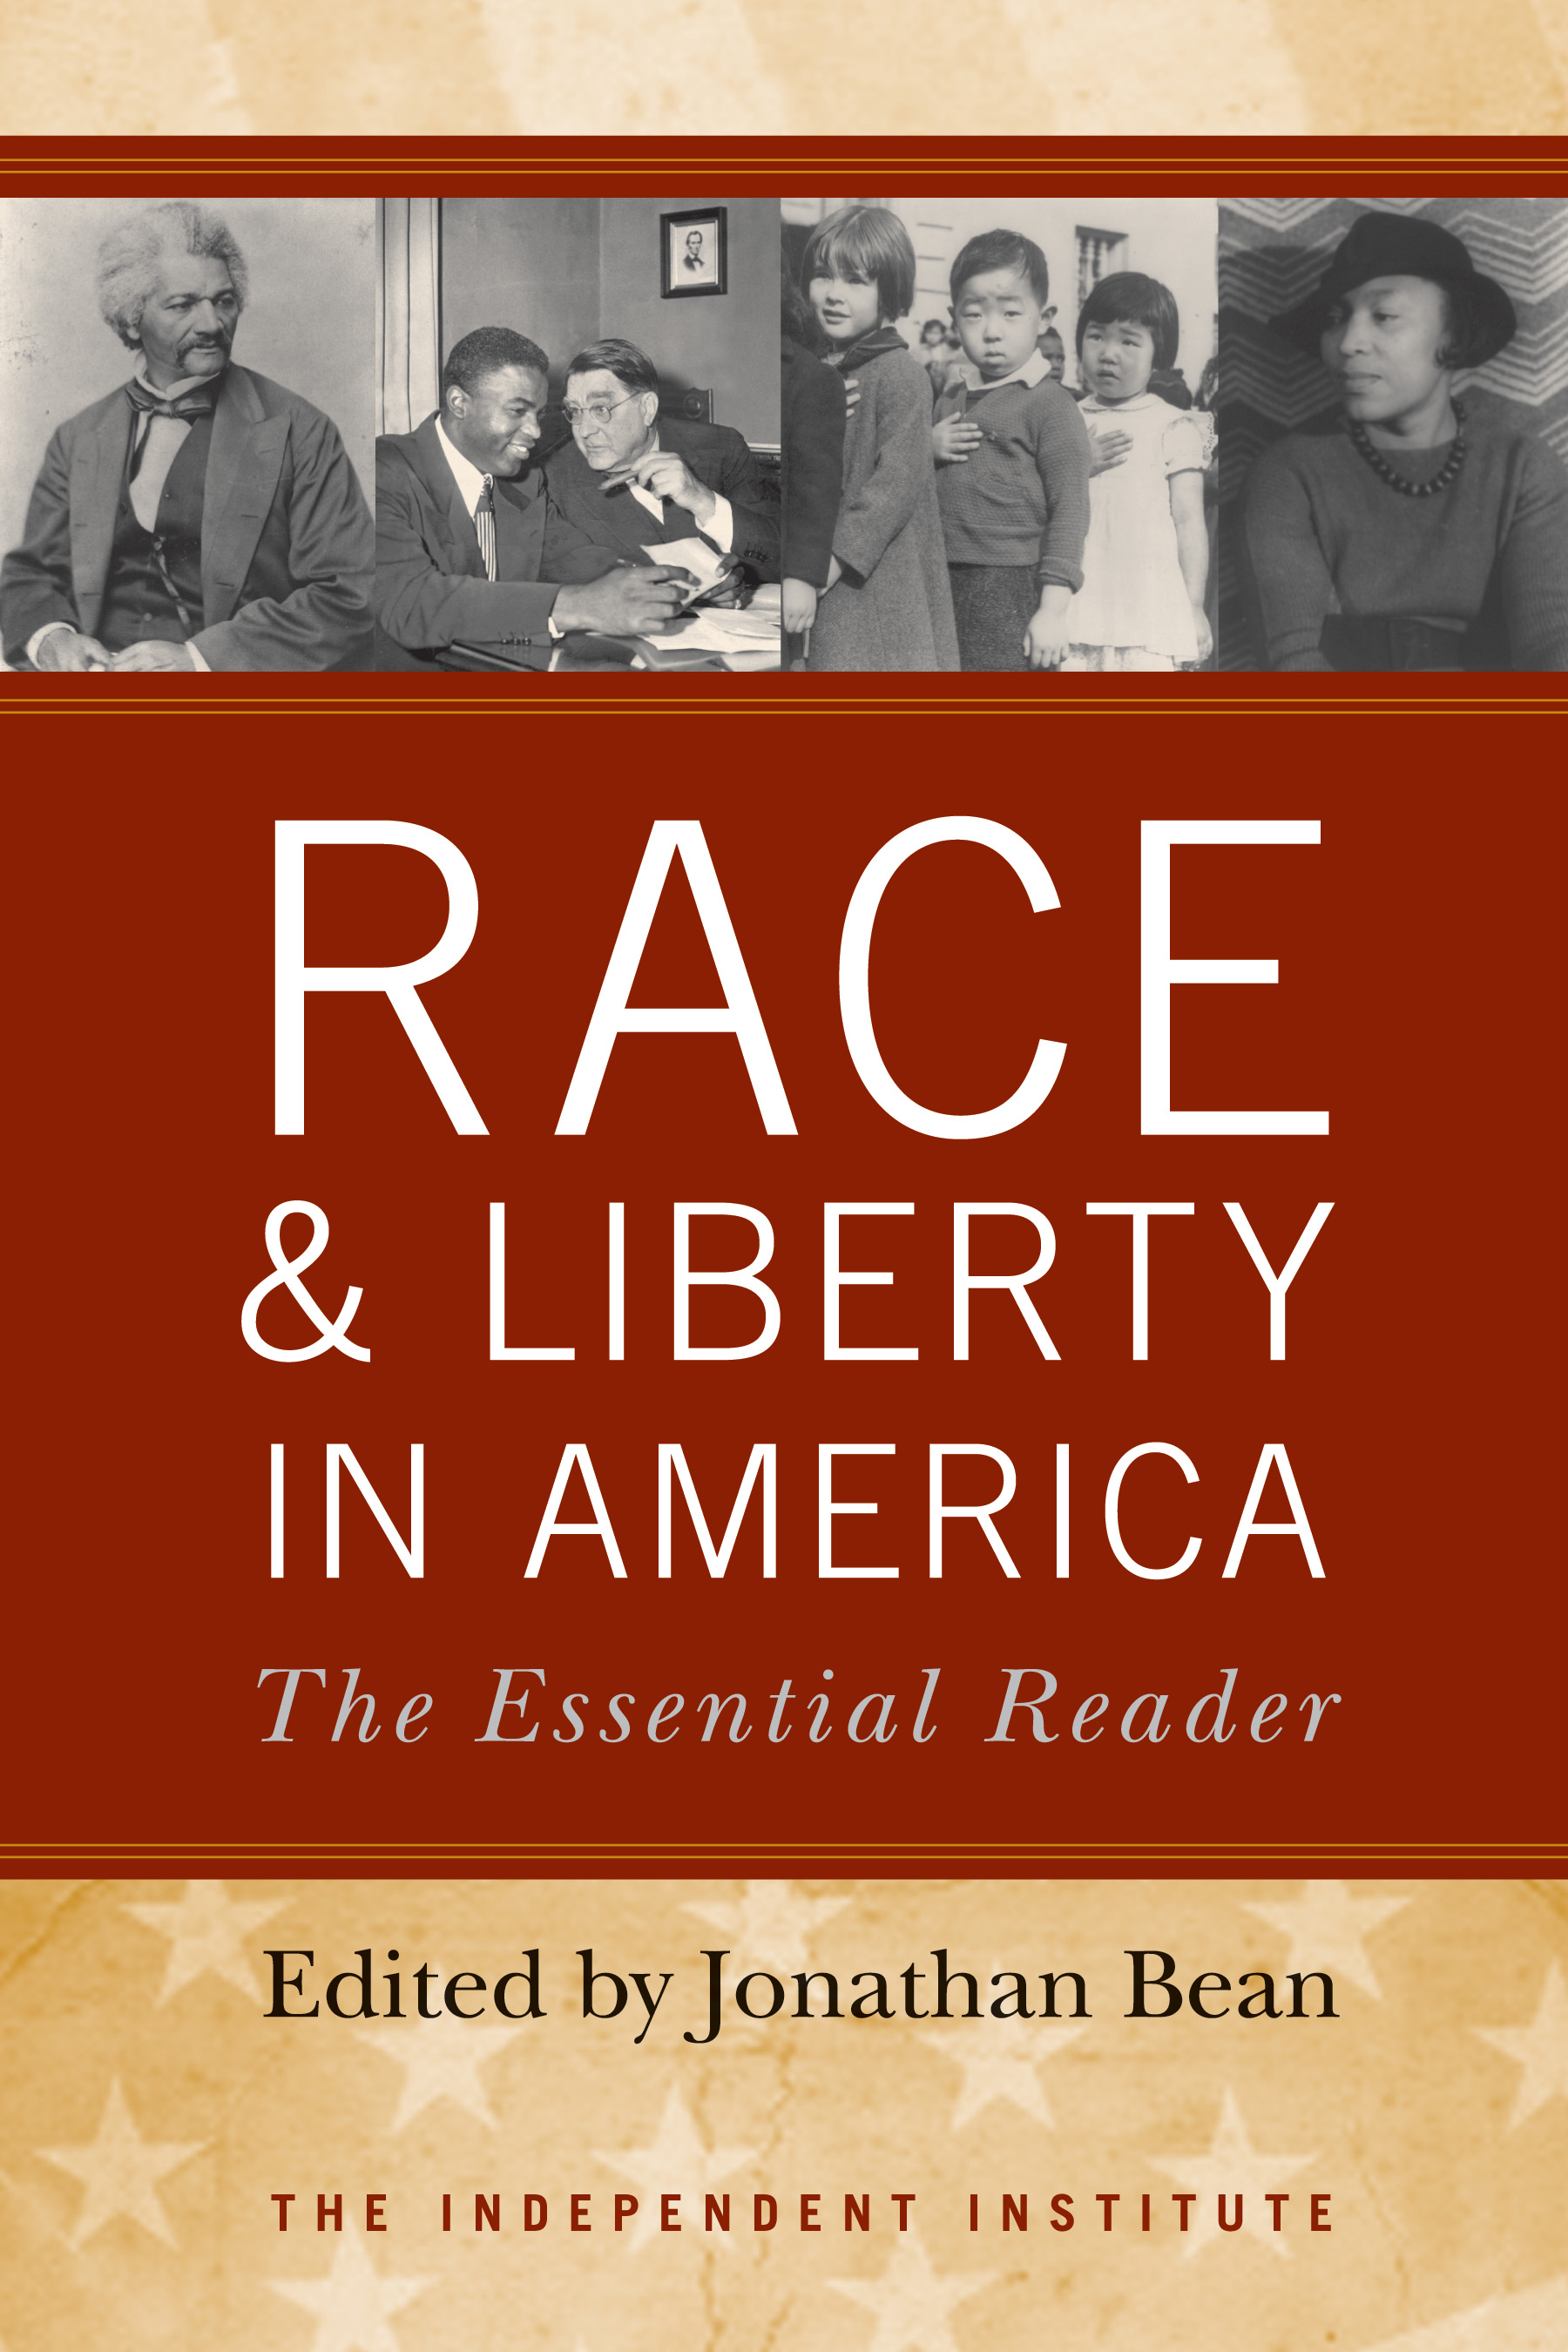 Race & Liberty in America: The Essential Reader